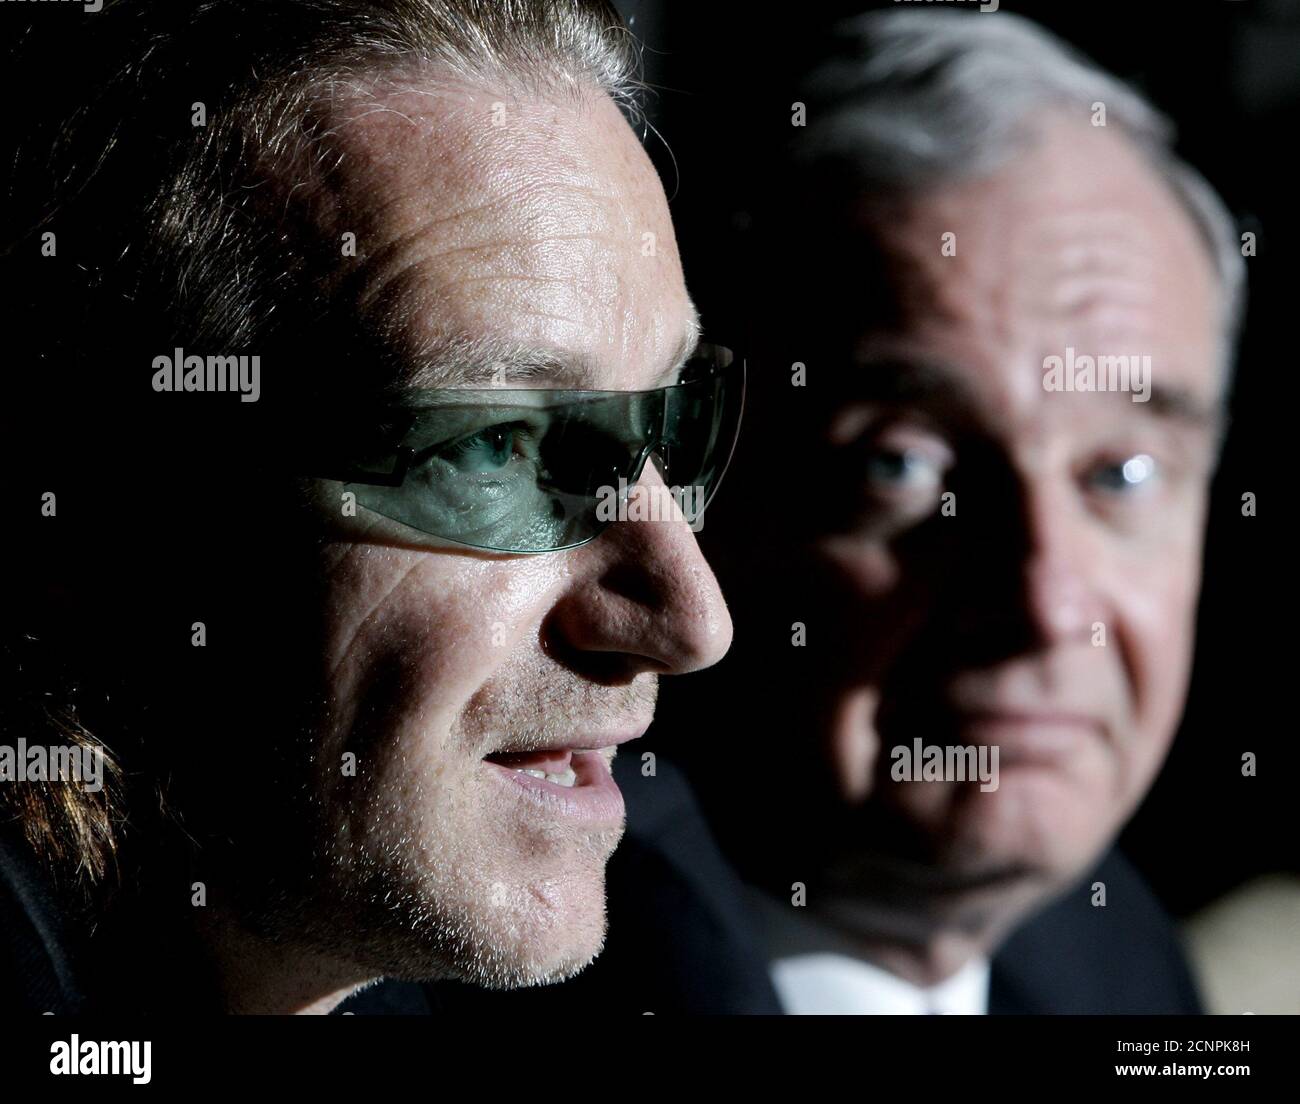 Canadian Prime Minister Paul Martin (R) listens to Bono, lead singer for the band U2, in Ottawa, May 12, 2004. Bono was supporting the government doubling of its support for the international AIDS fund to C$70 million for the 2005-06 fiscal year. REUTERS/Jim Young  JY Stock Photo